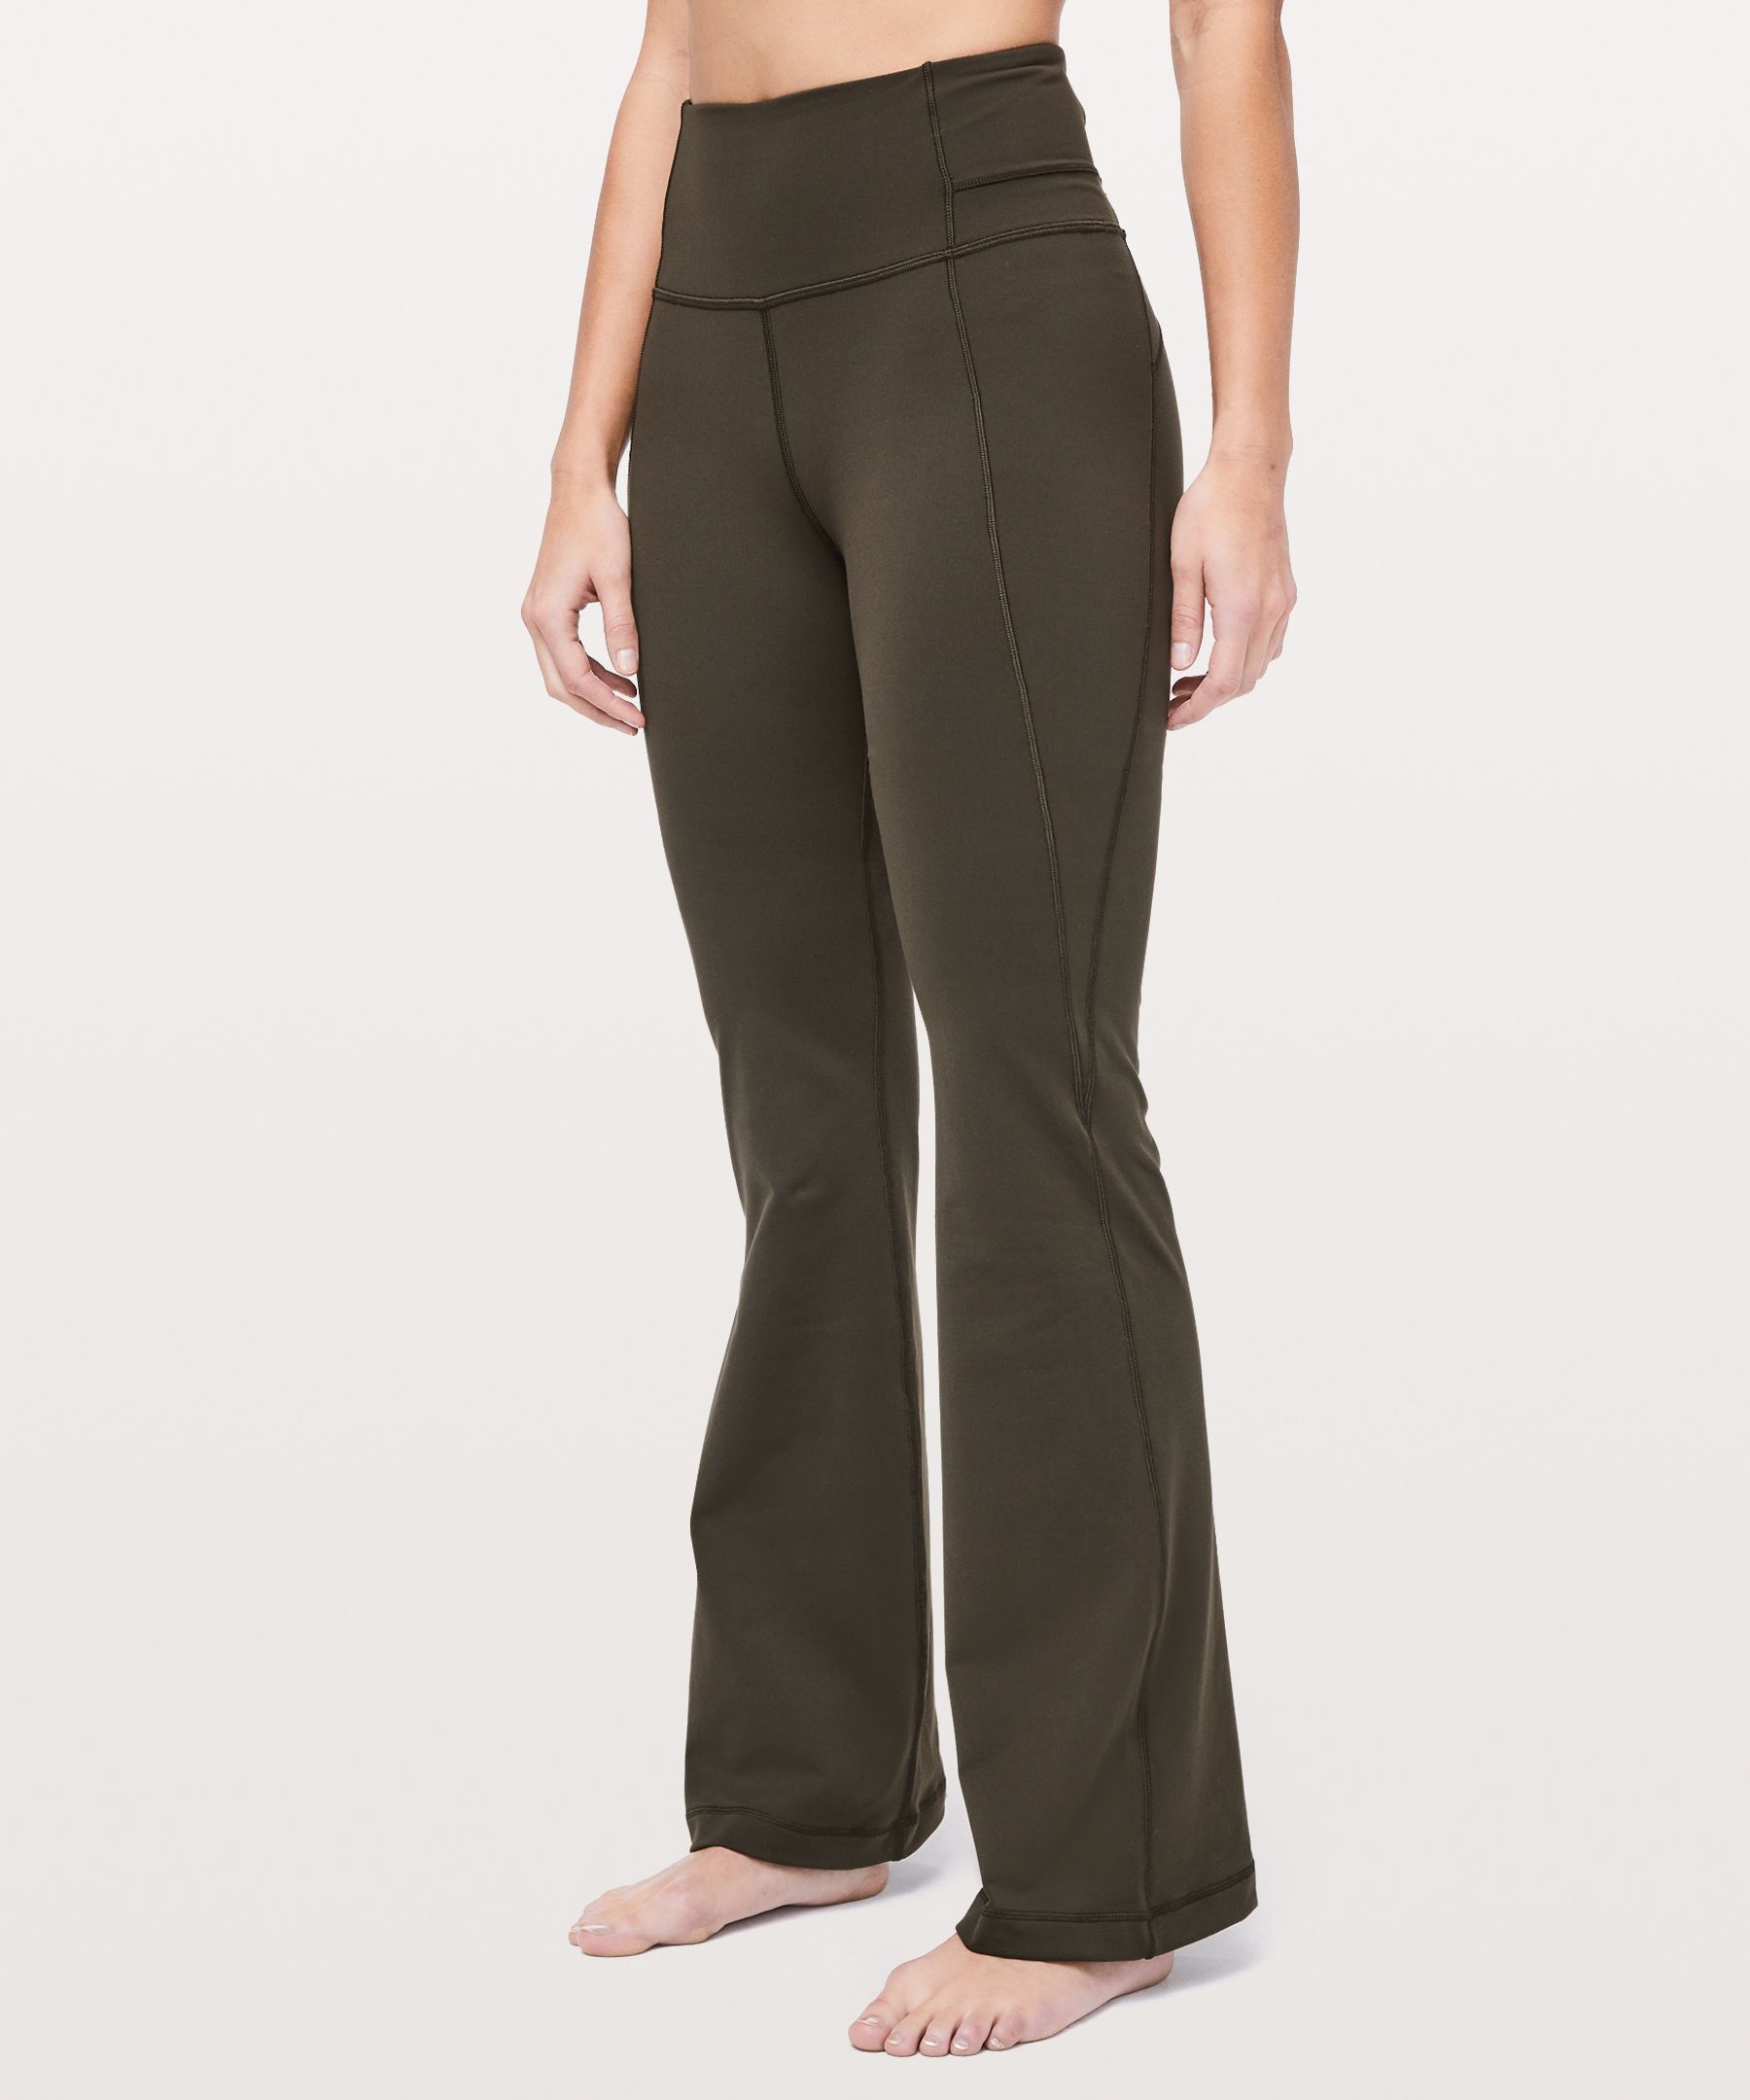 groove pant flare